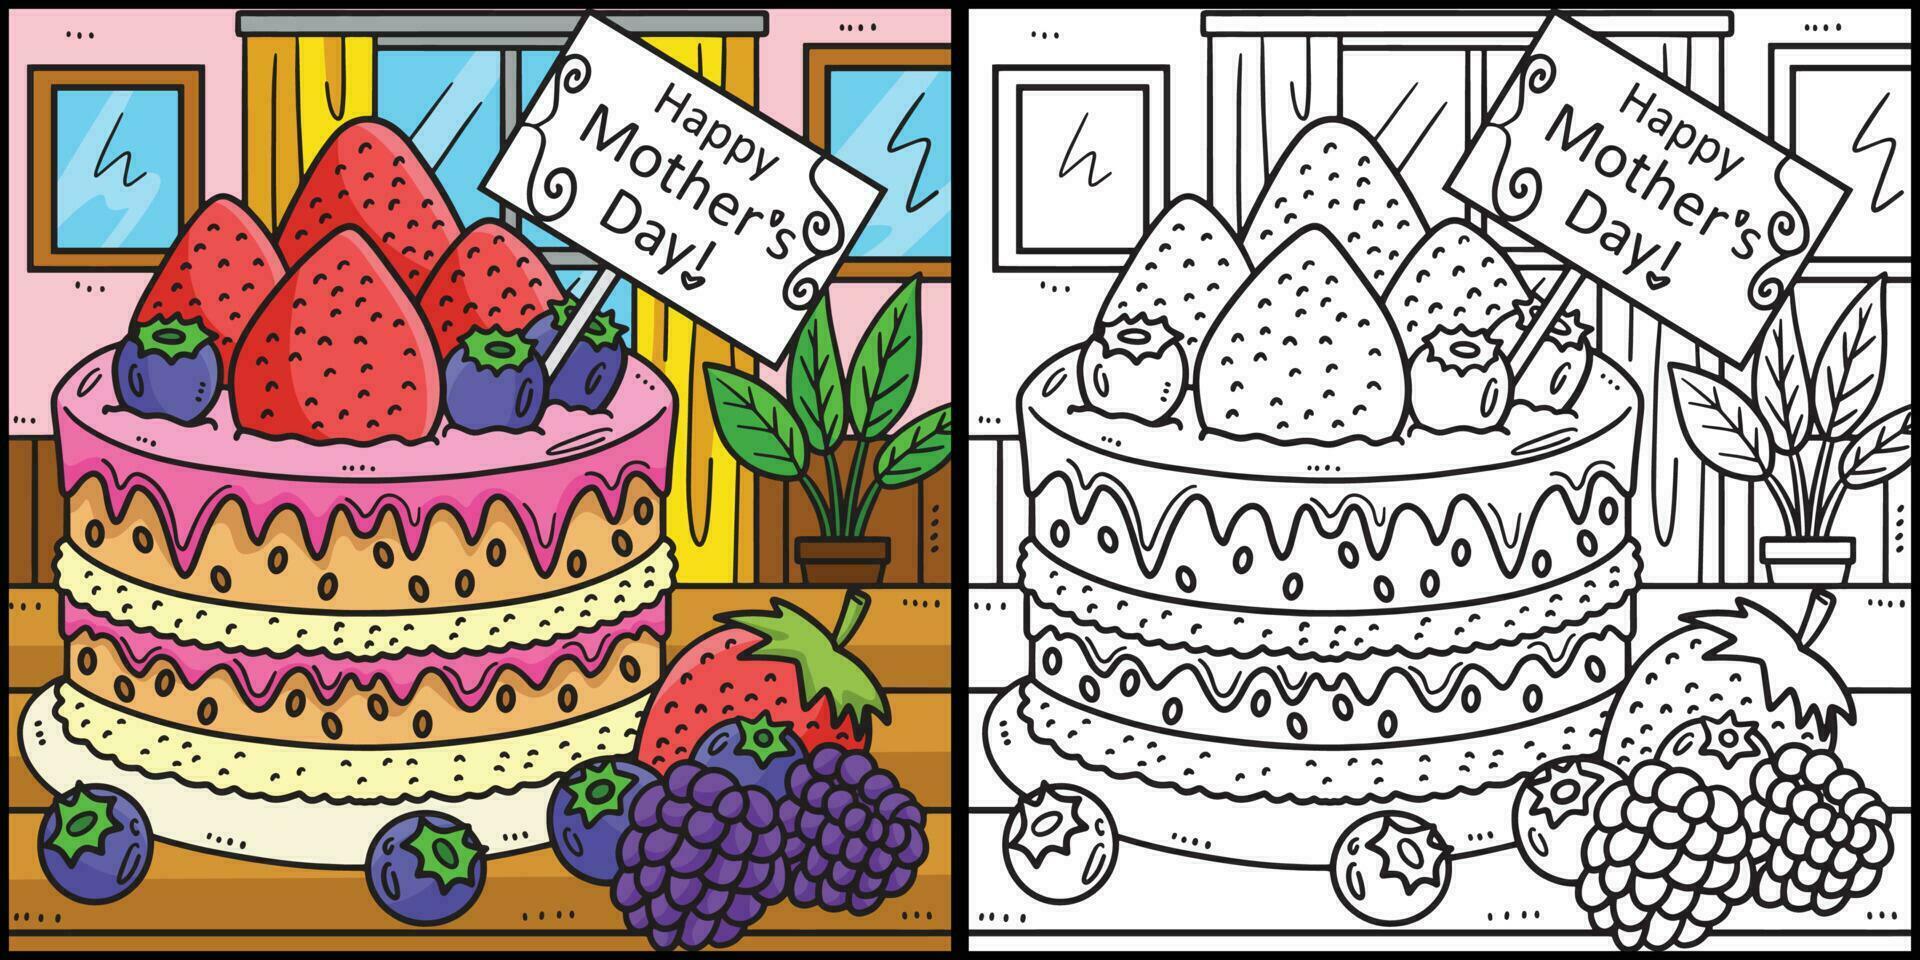 Mothers Day Cake Coloring Page Illustration vector